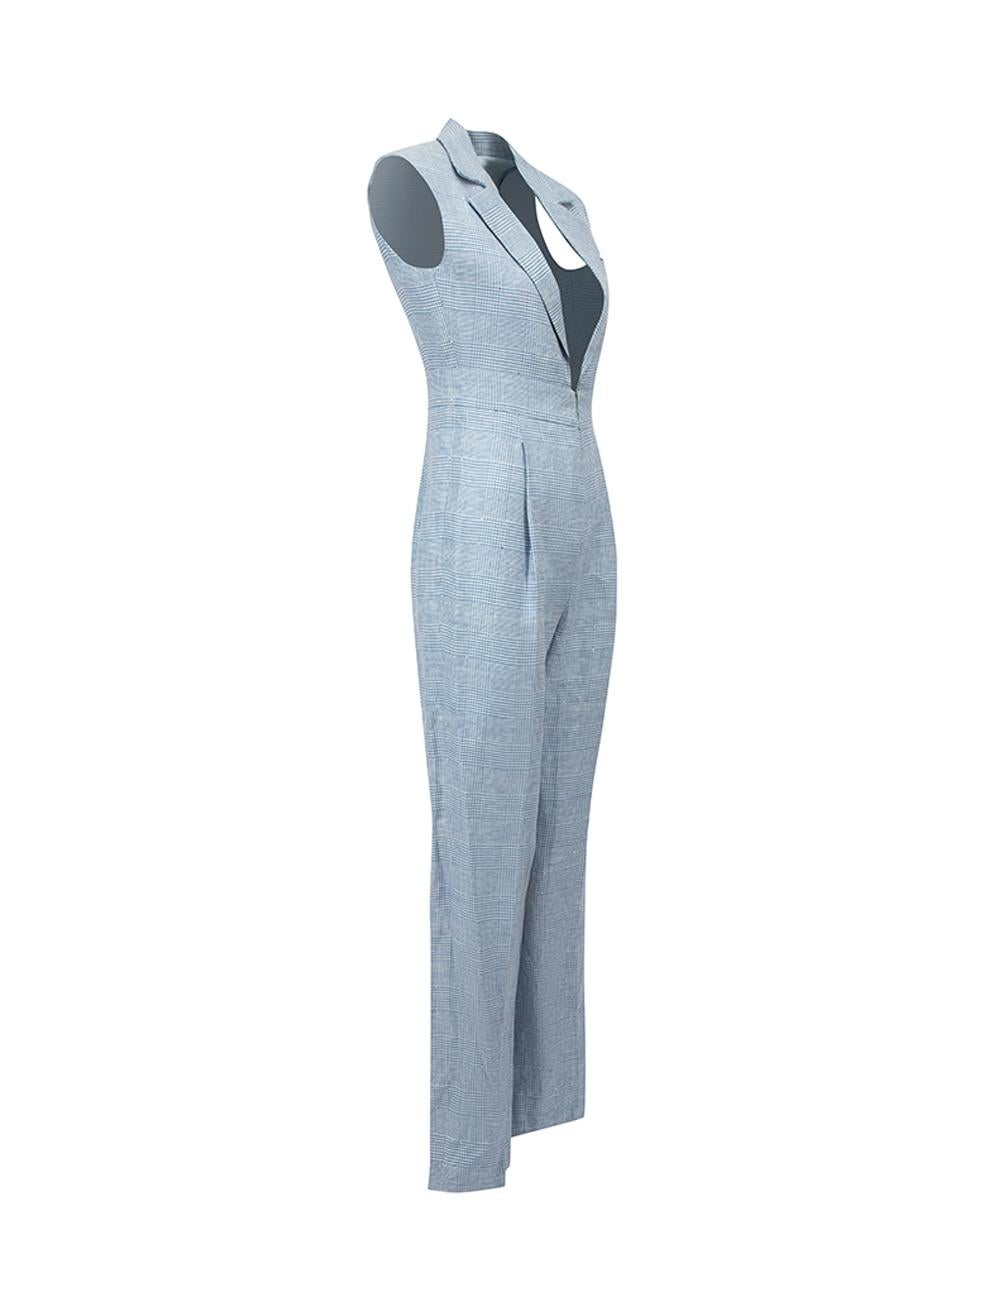 CONDITION is Very good. Minimal wear to jumpsuit is evident. Minimal wear to the outer fabric where slight pulls to thread can be seen on this used Sanne designer sample item. Please note that this item does not have brand label.
 
 Details
 